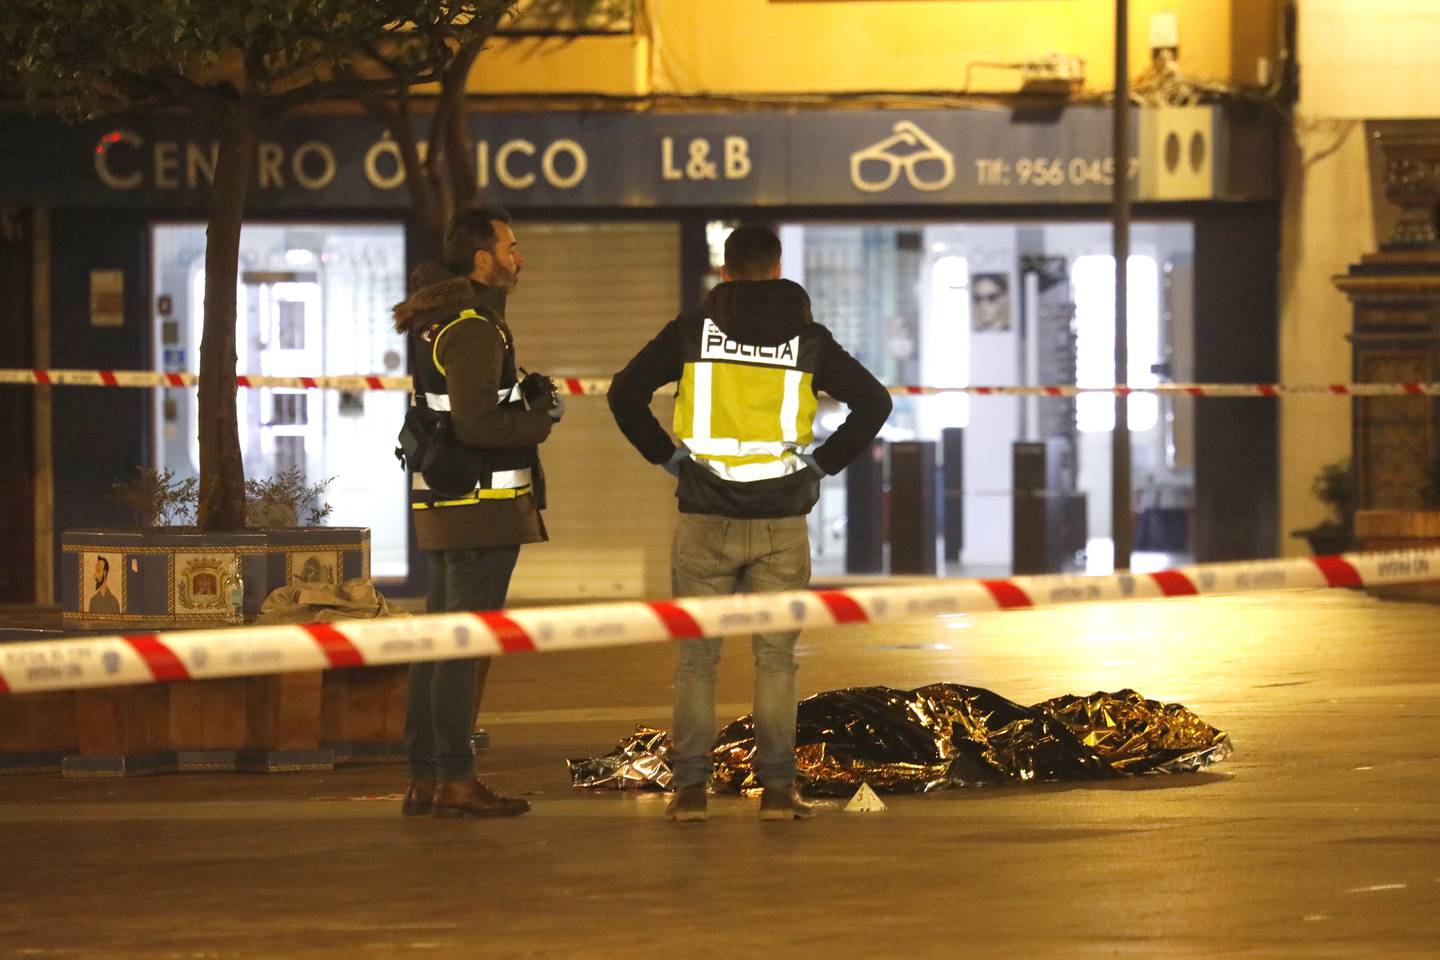 Members of the Spanish National Police at the scene of the attack in Algeciras, southern Spain, on Wednesday. EPA